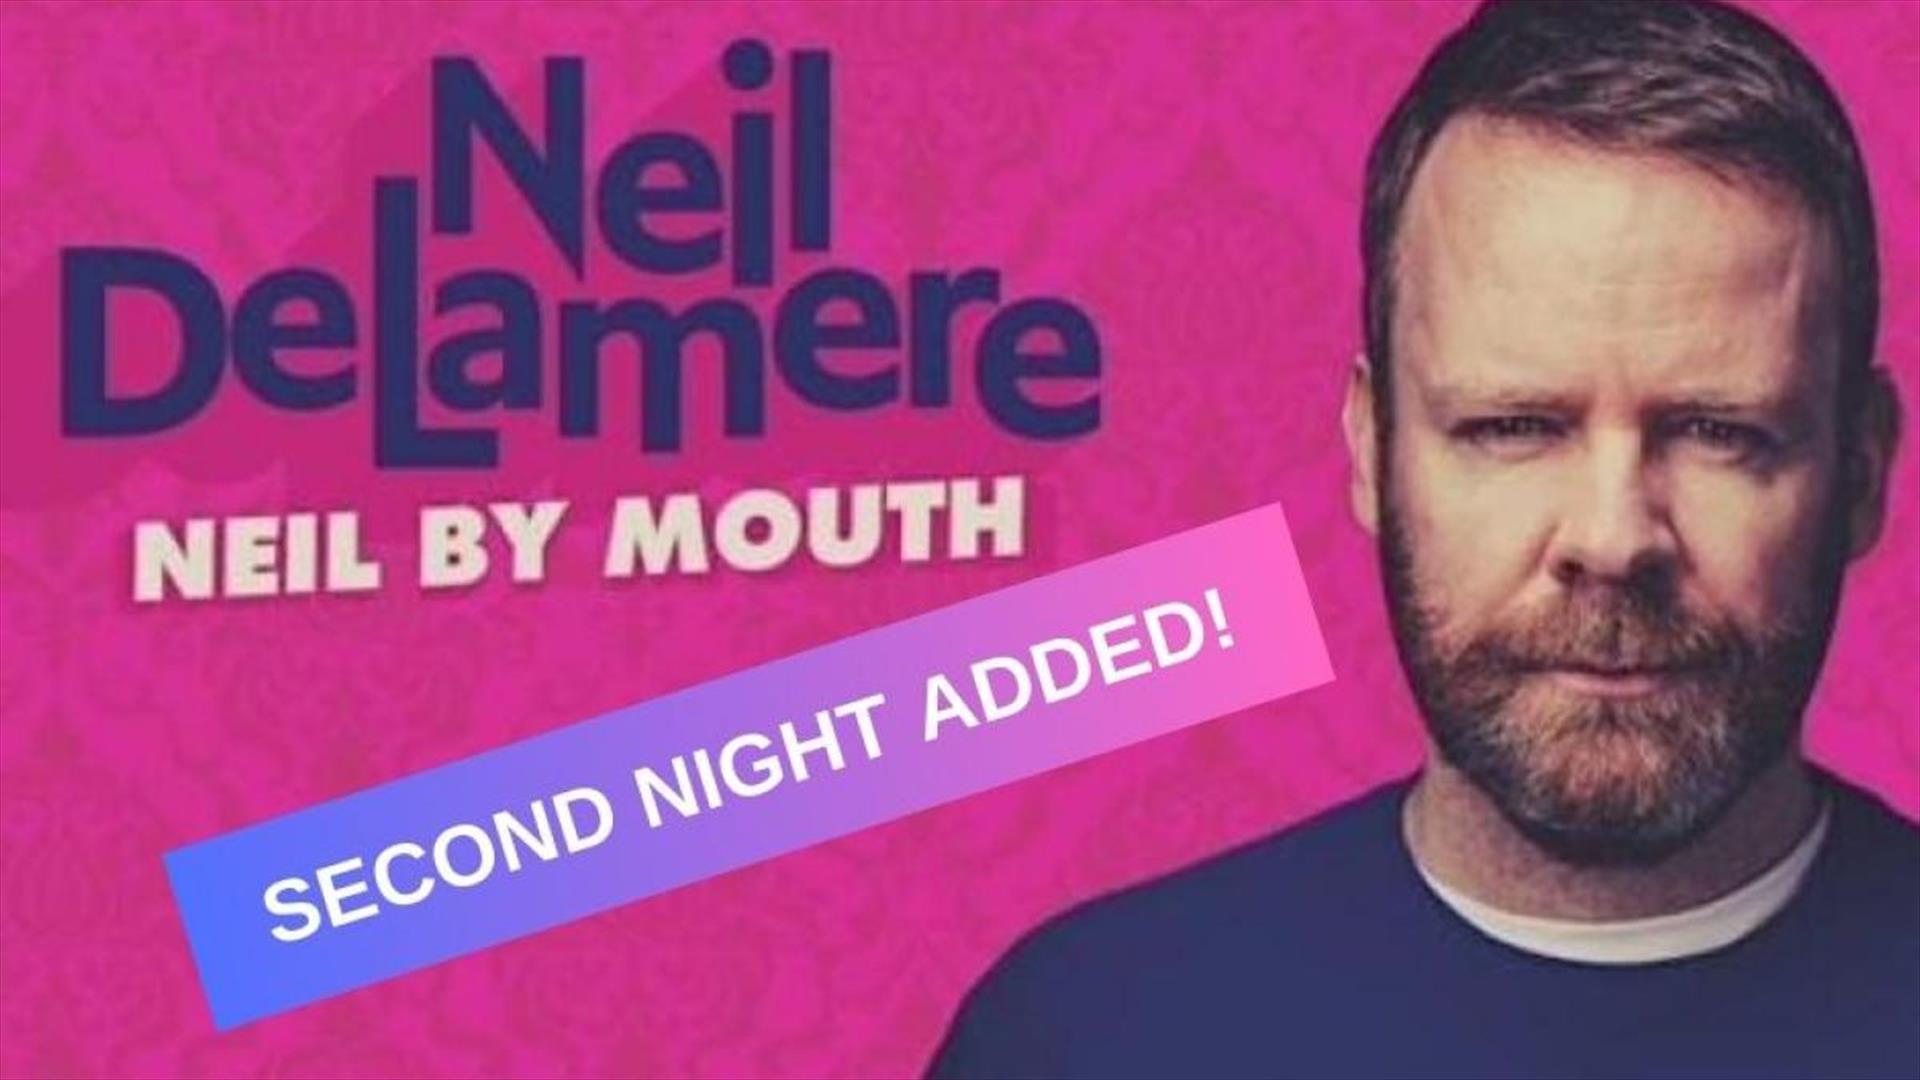 Neil Delamere 2nd night at Portico